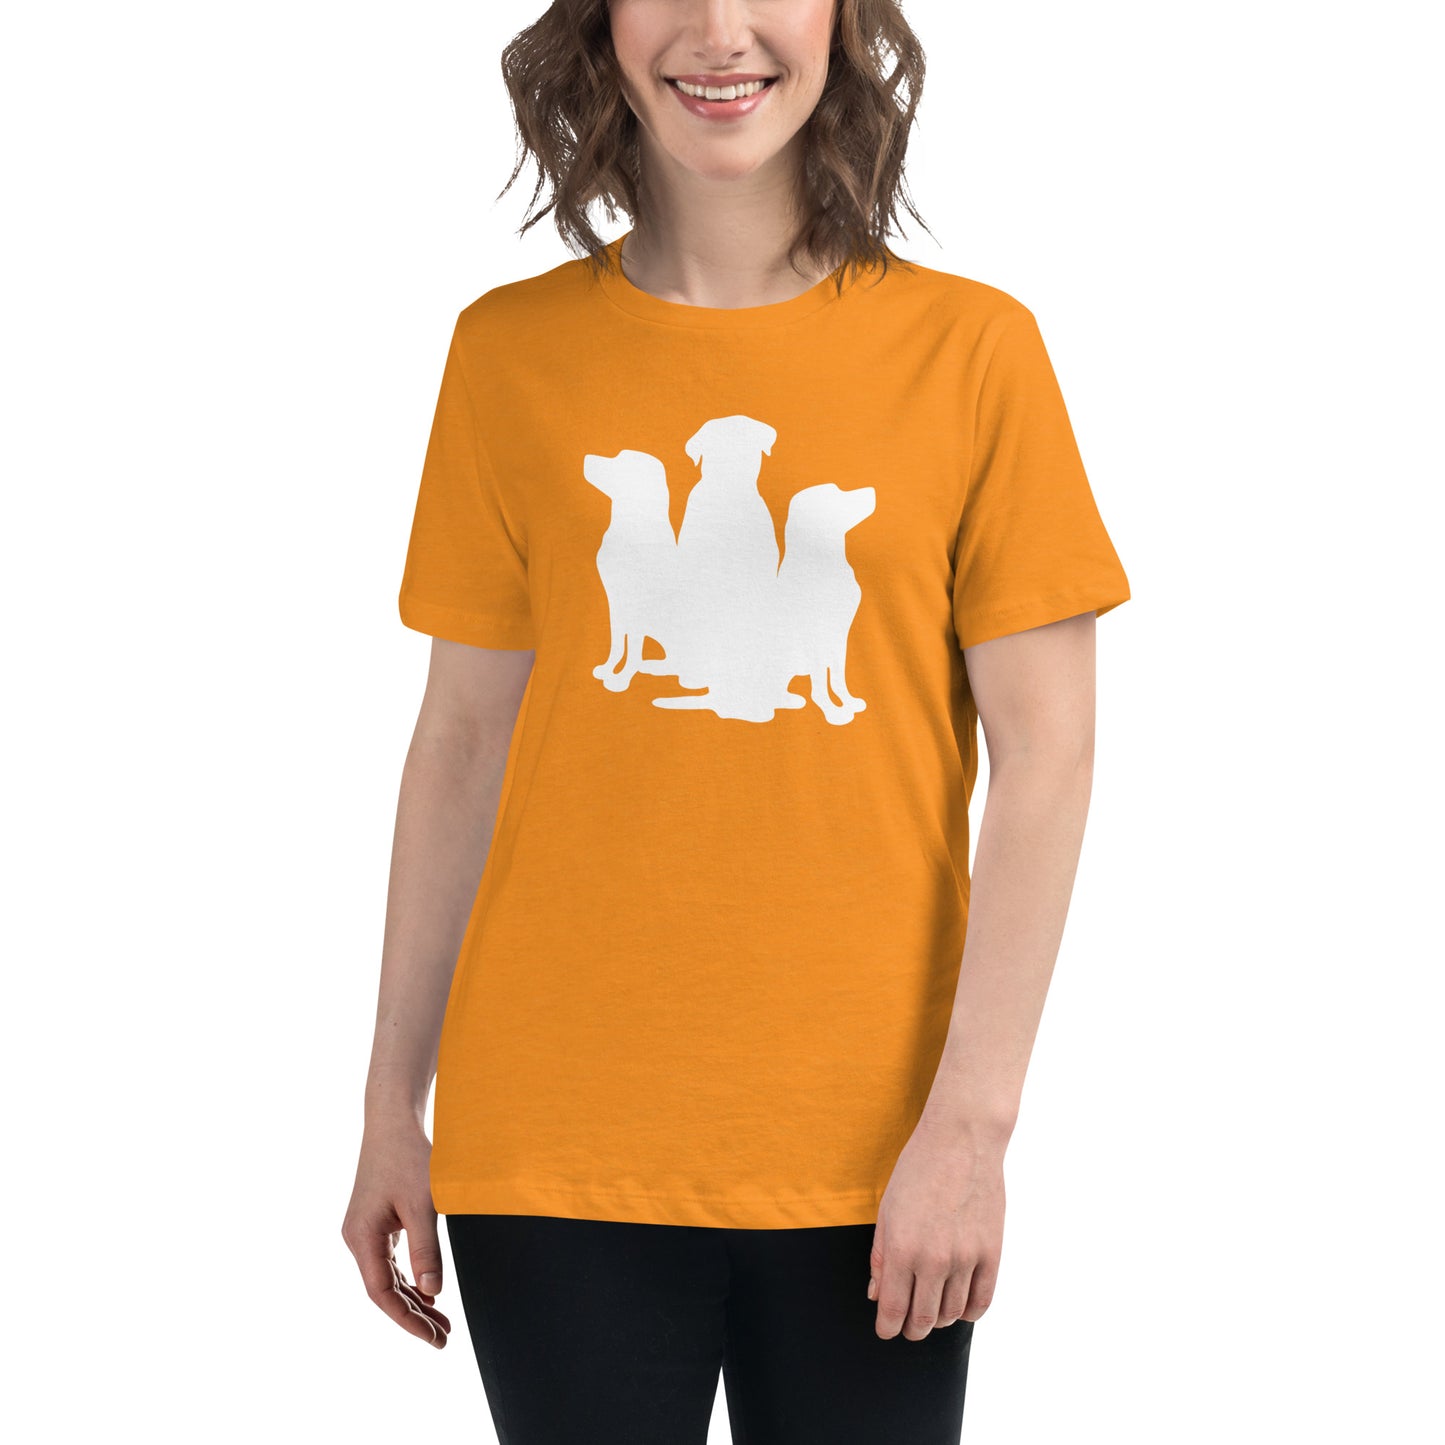 Women's Relaxed T-Shirt 3 Dogs White